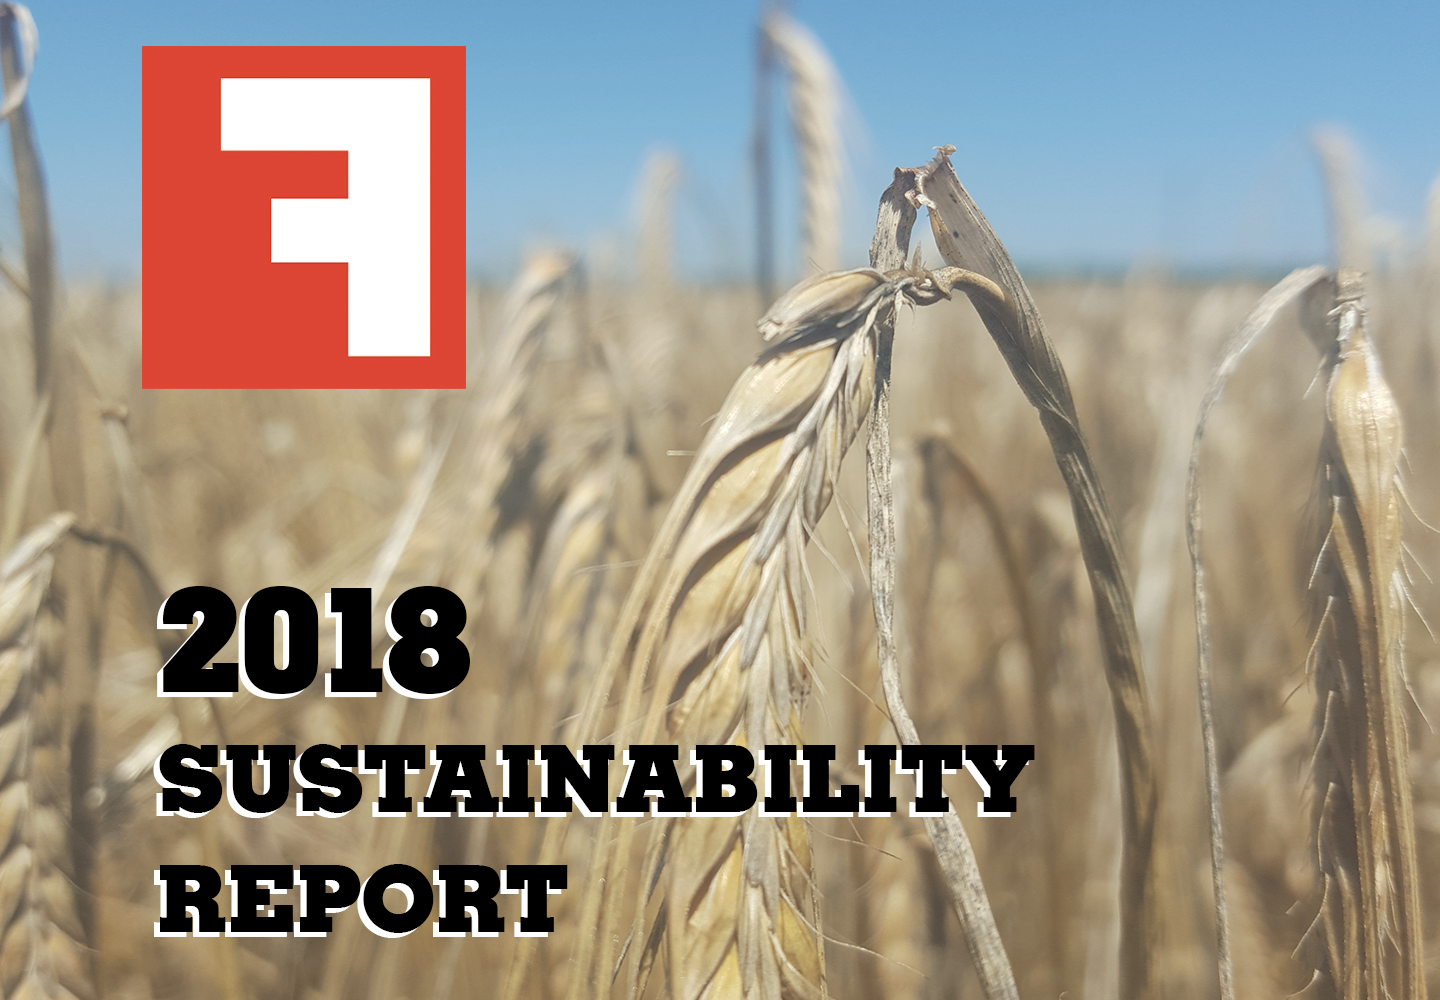 2018-sustainabiity-report-wide.png#asset:8477